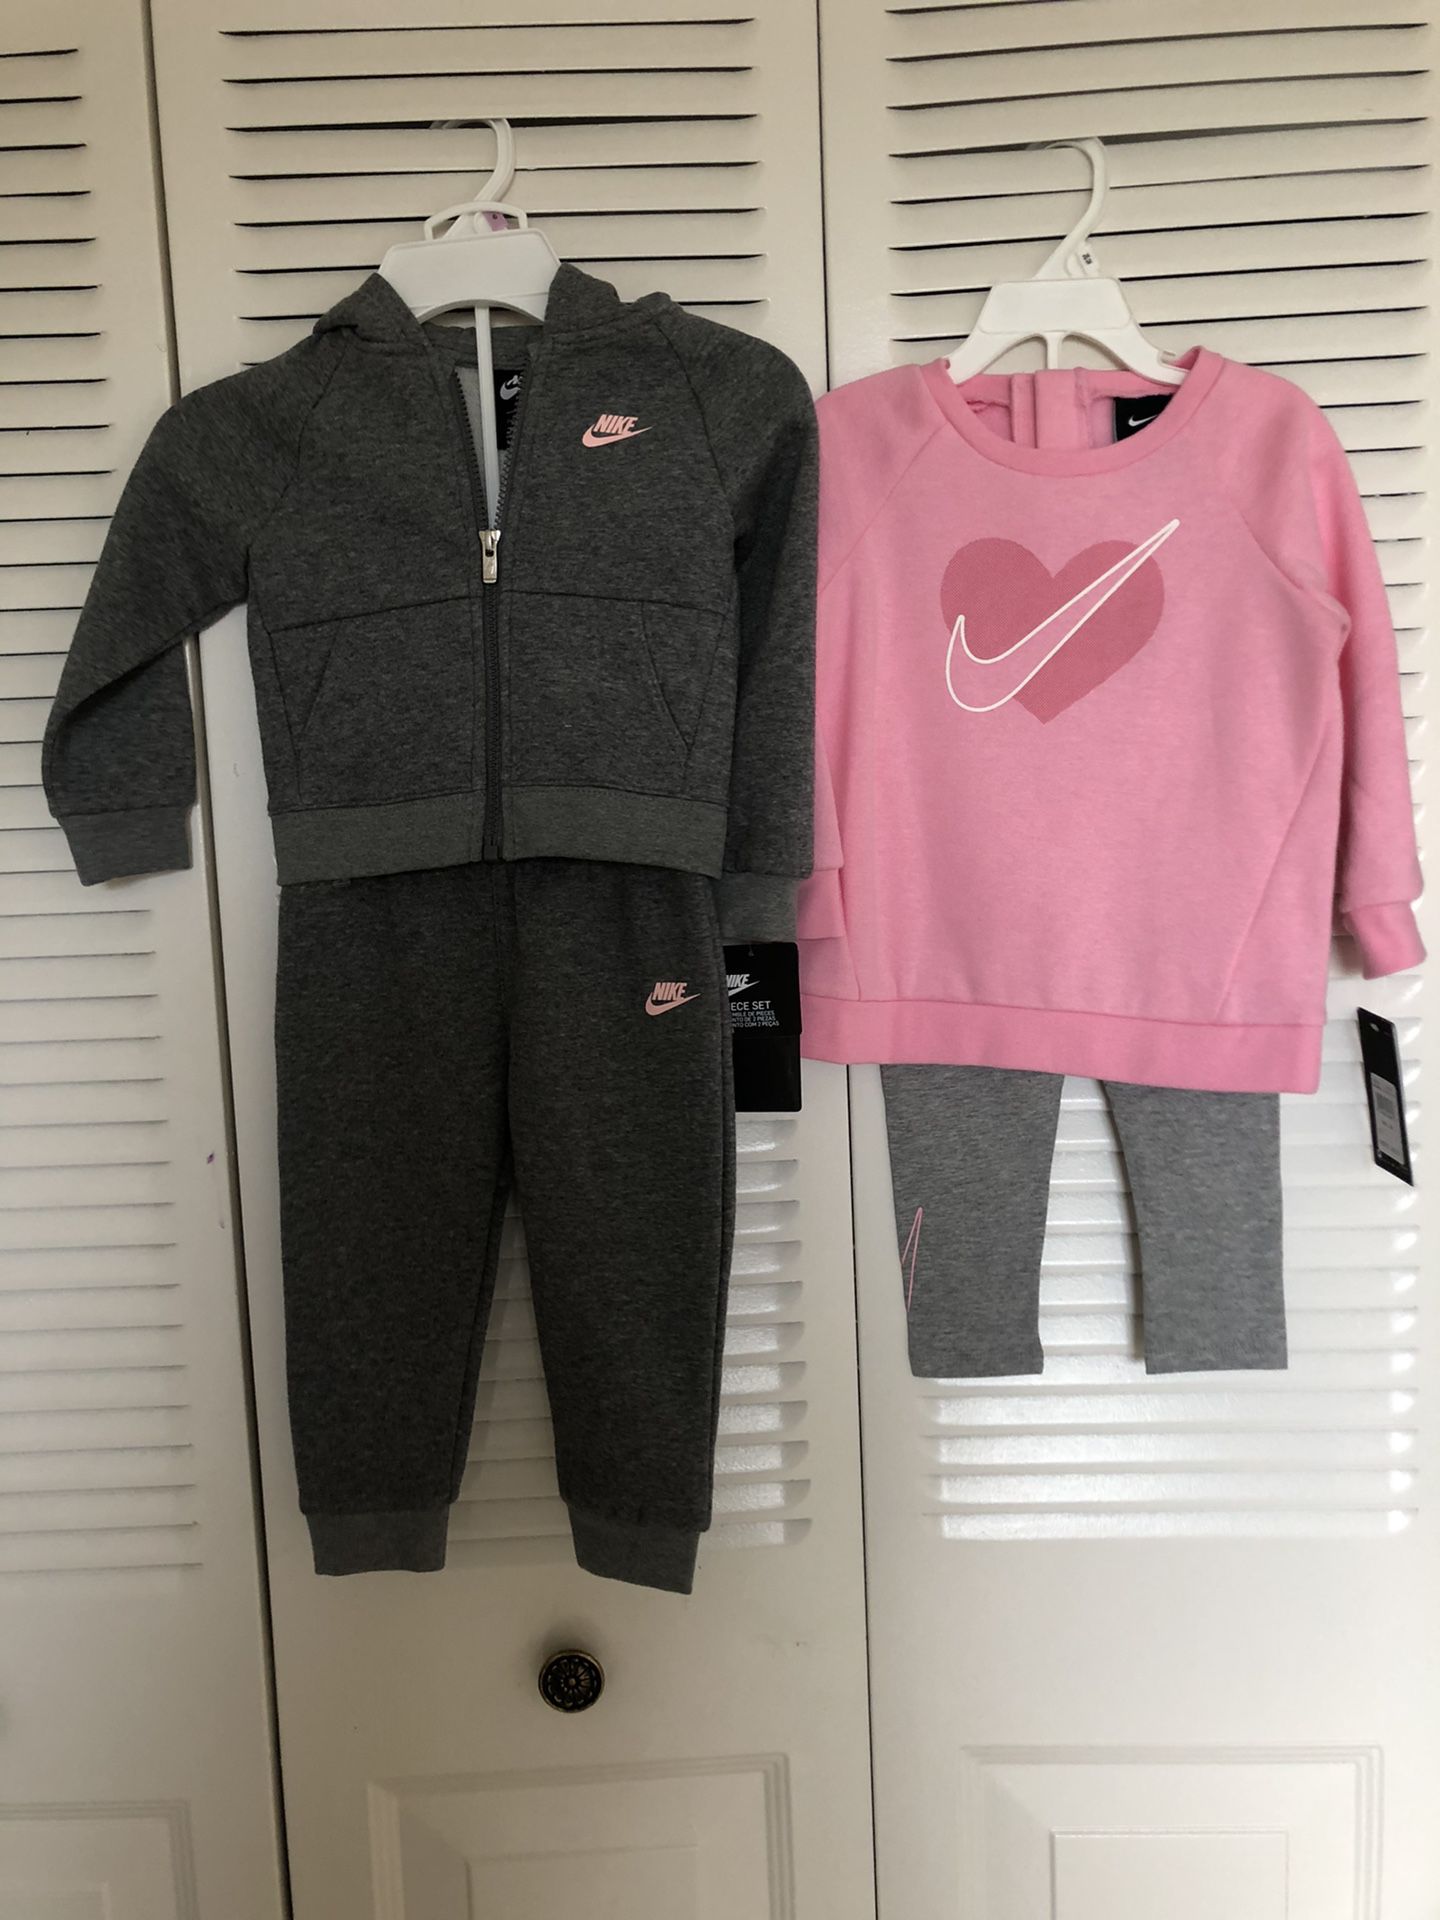 Nike’s 2 sweat suits 2T